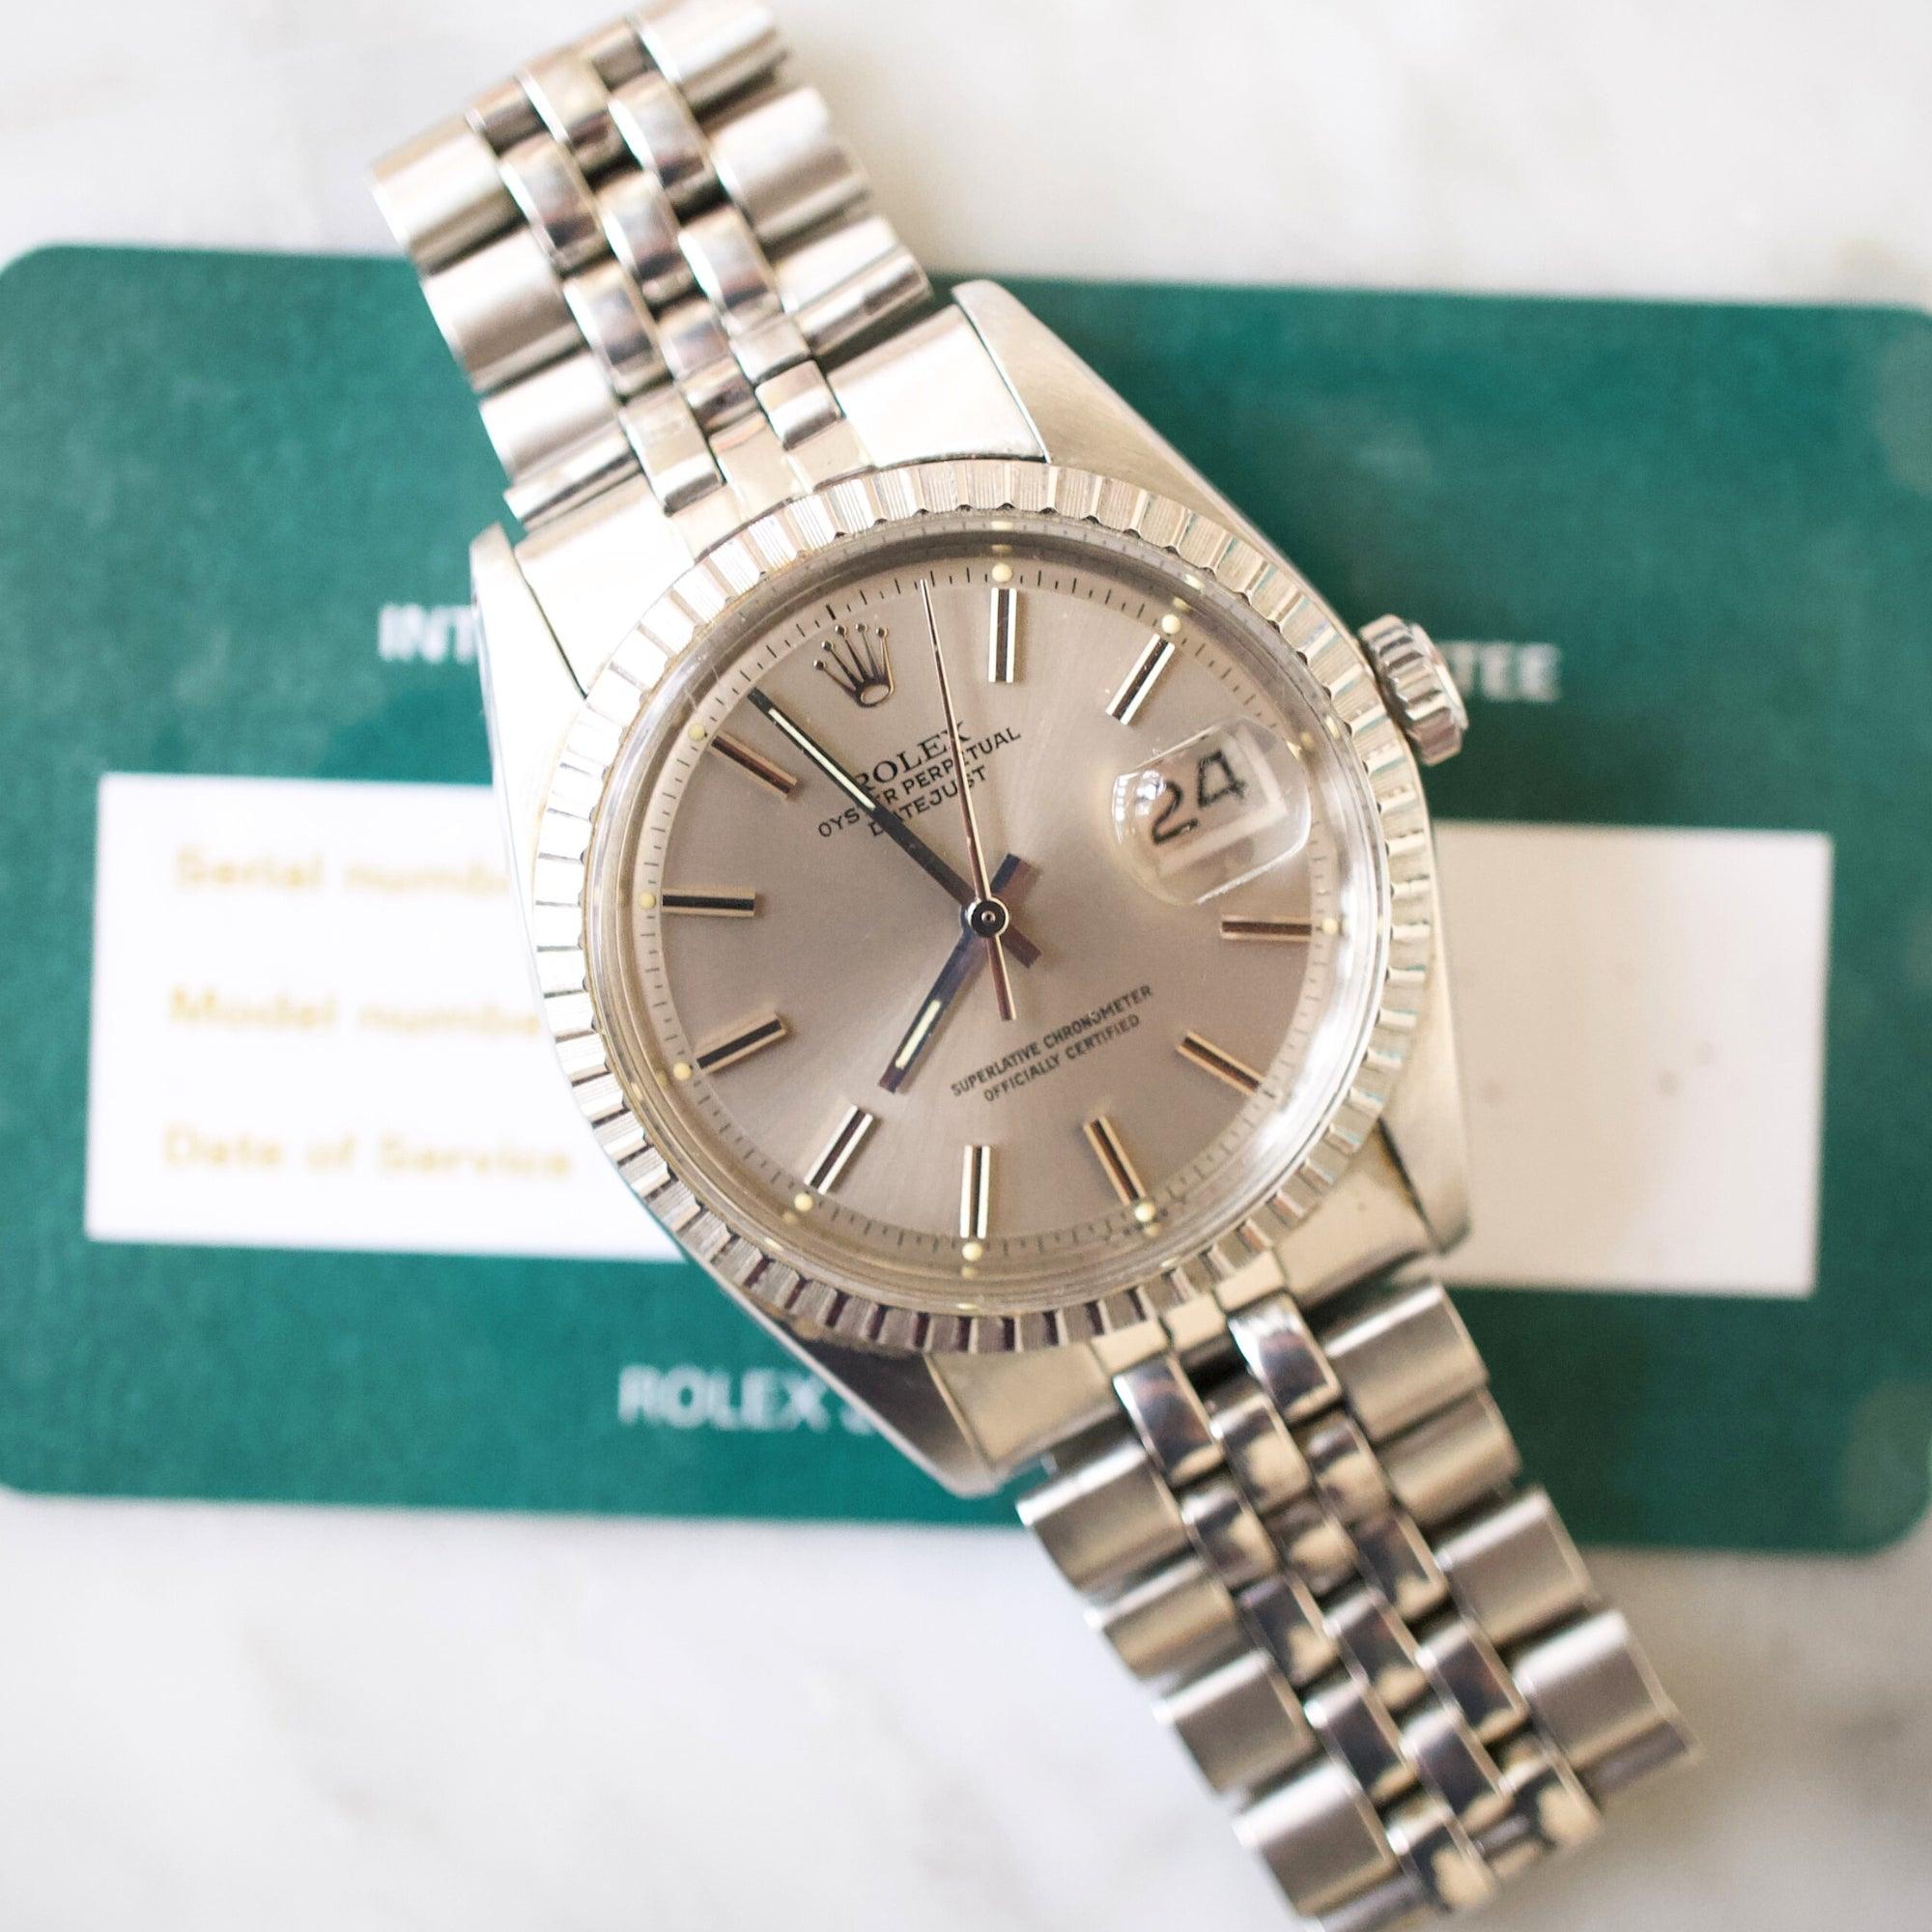 SOLD OUT: 1978 Rolex Datejust 1603 36MM Ghost/Grey Dial FACTORY 